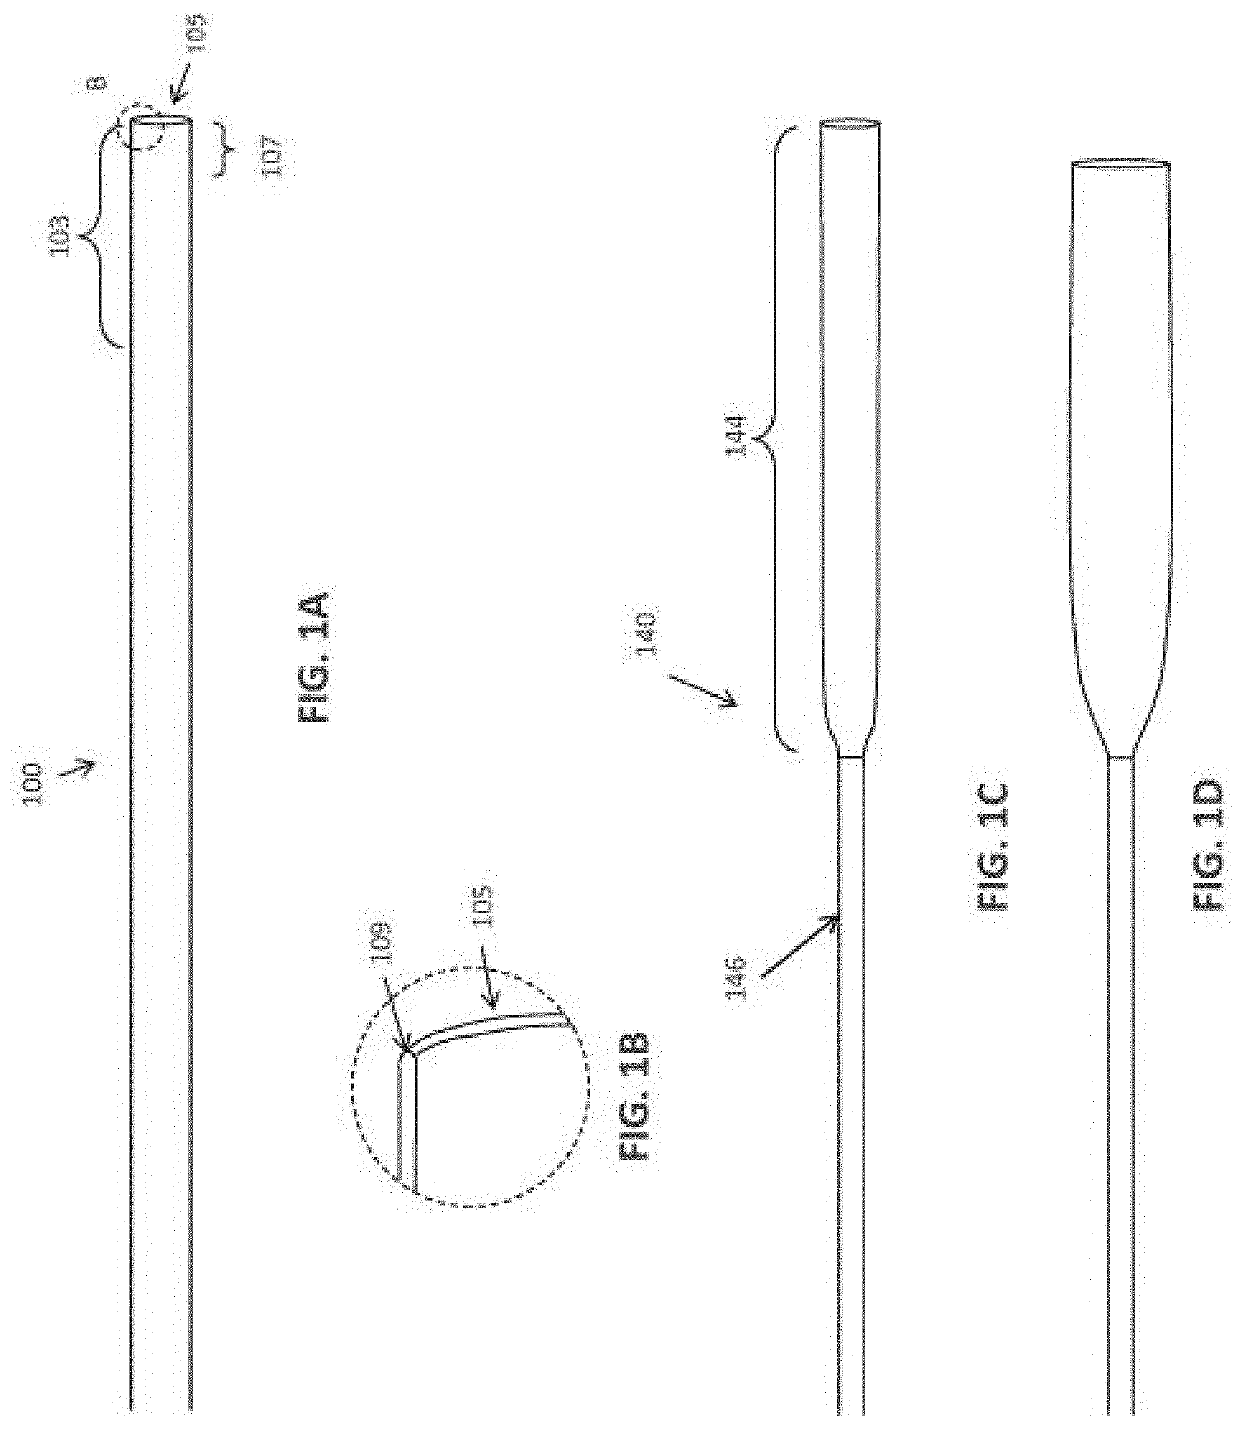 Inverting mechanical thrombectomy apparatuses